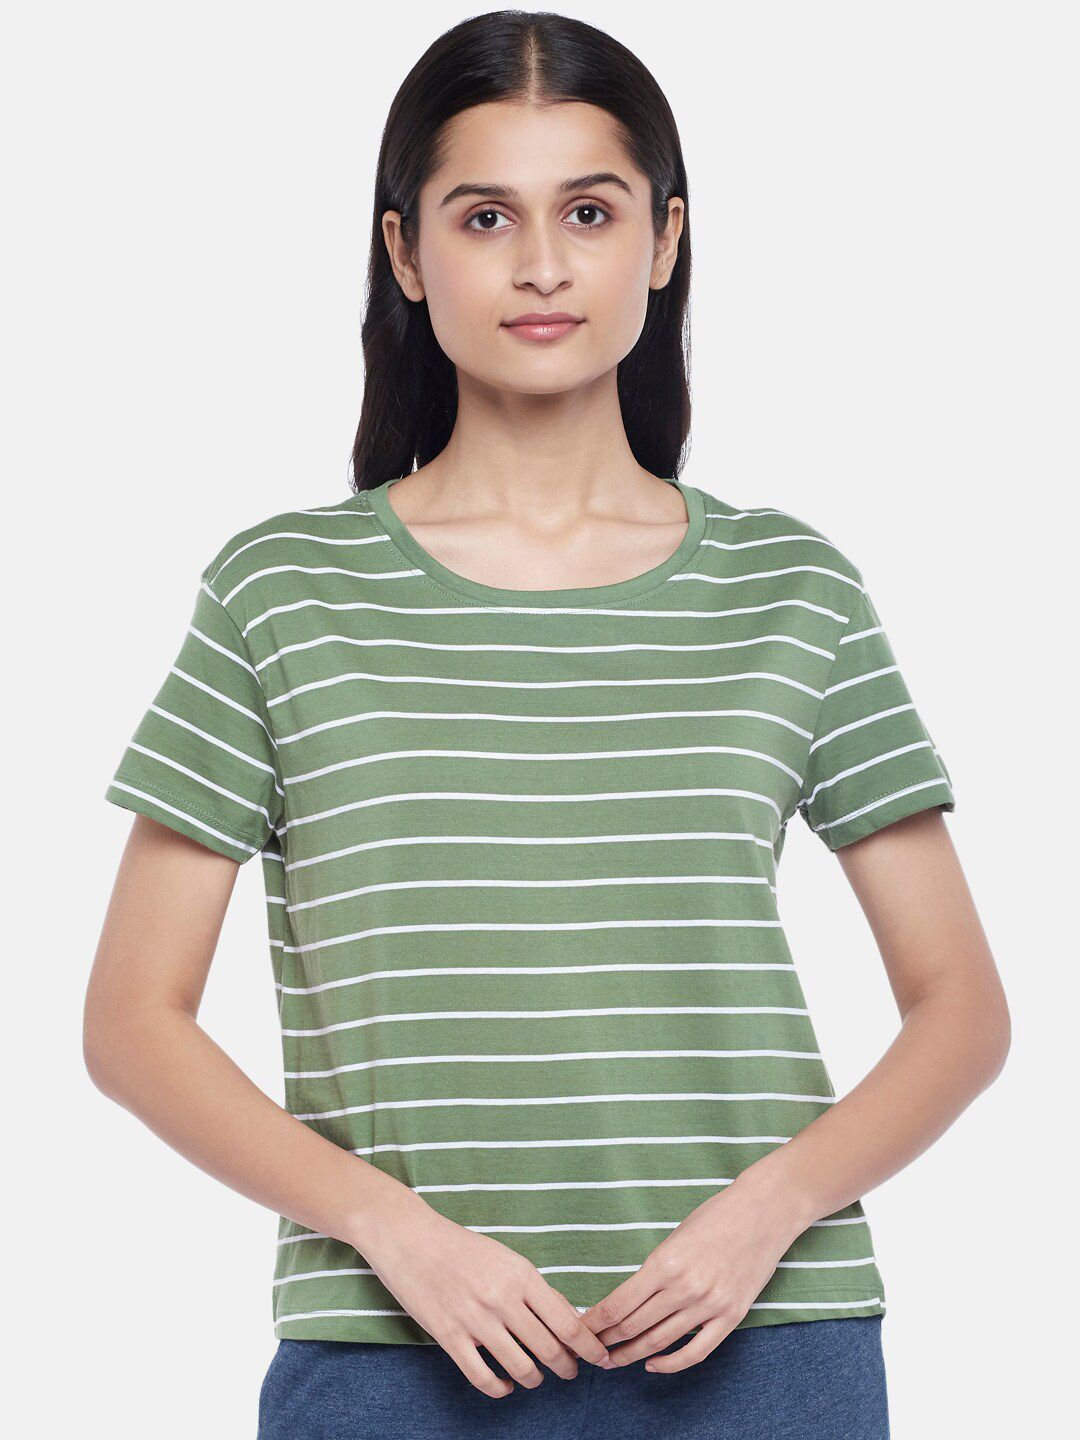 Dreamz by Pantaloons Green Striped Lounge tshirt Price in India